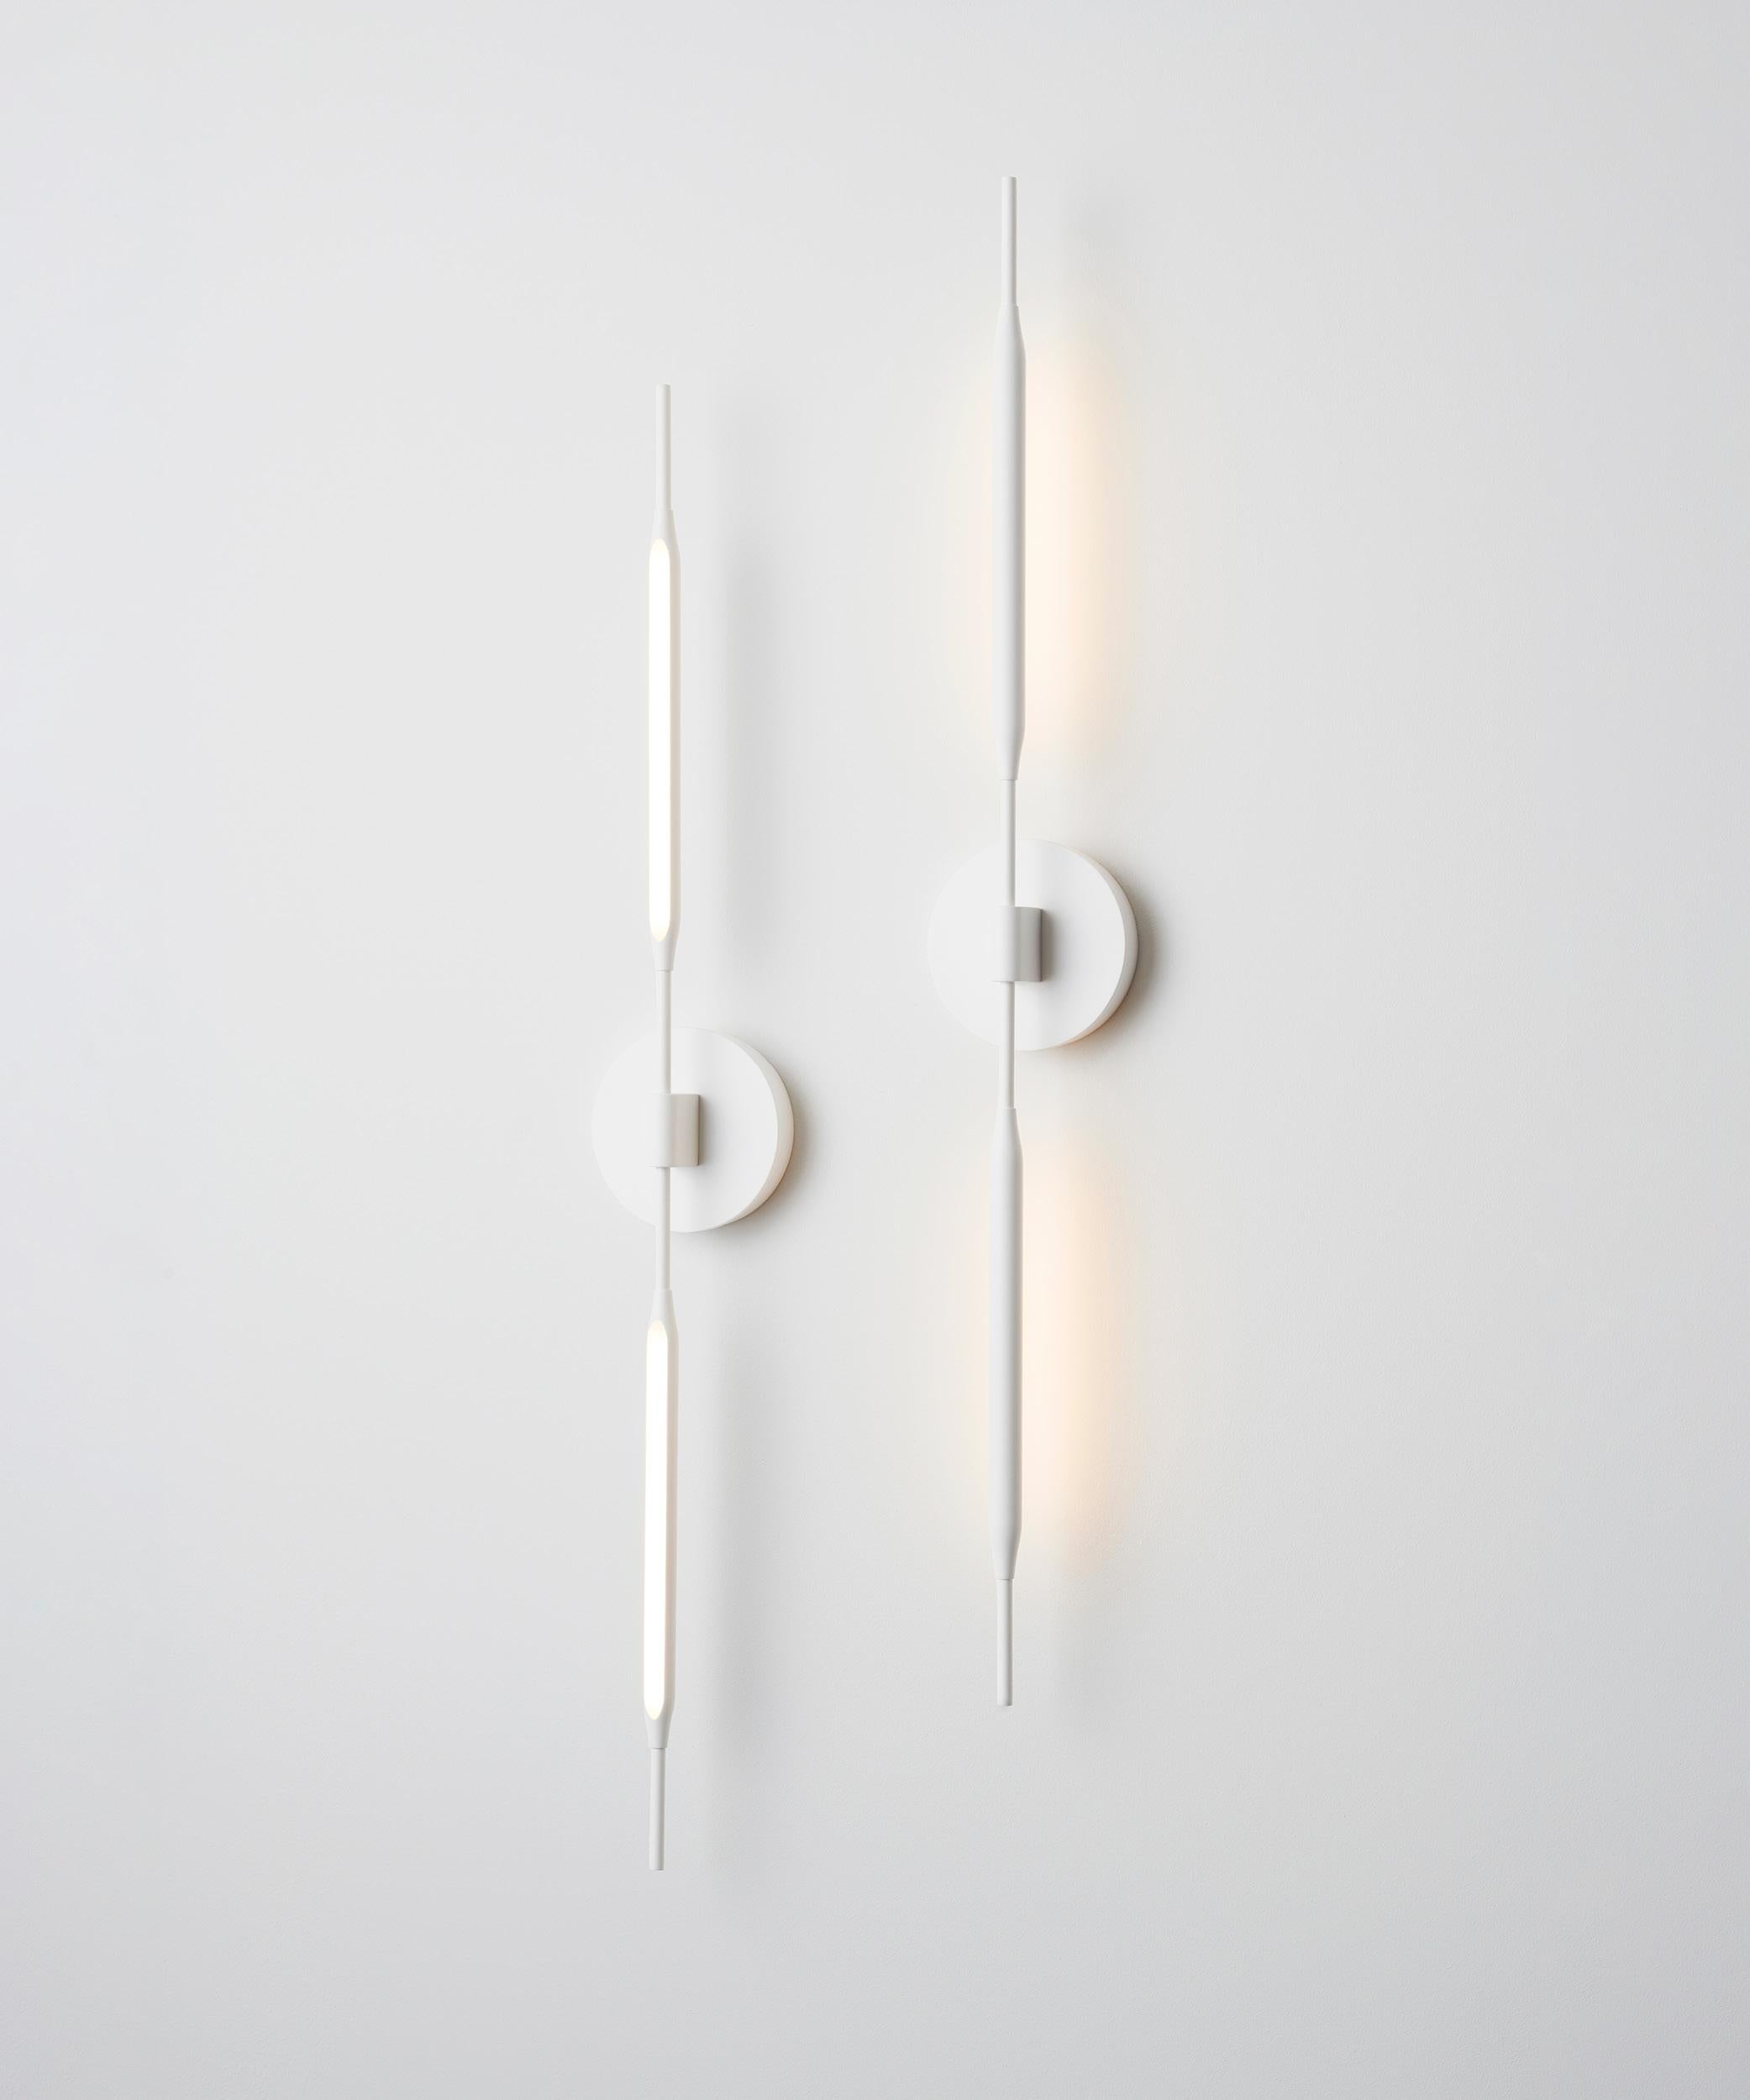 Contemporary Reed Wall Light in Matt-black Powdercoat Finish, UL Listed For Sale